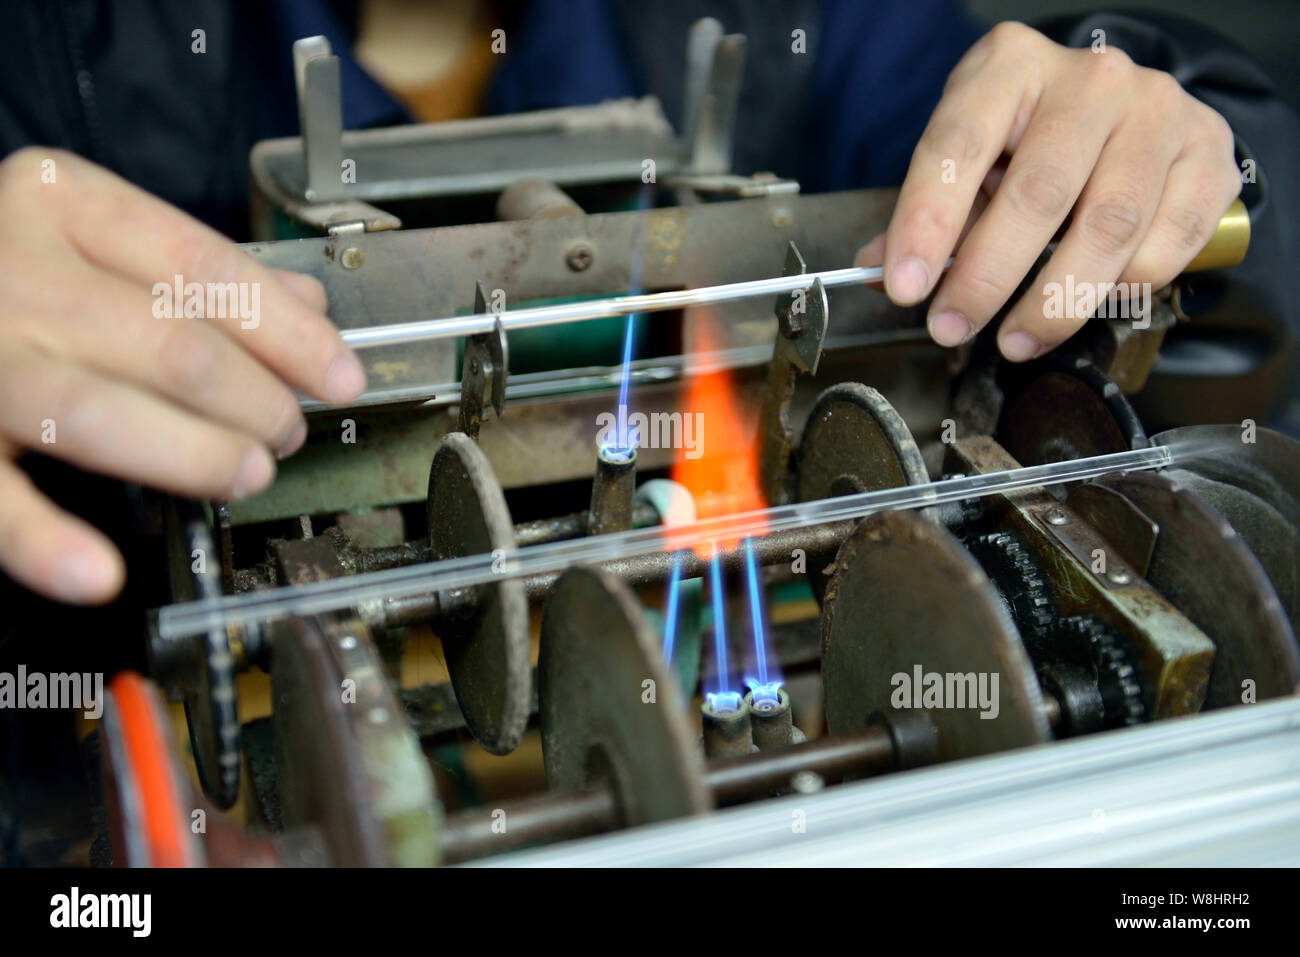 A Chinese worker heats up a mercury-in-glass thermometer in flame to prolong the neck of the tube at the plant of Jiangsu Yuyue Medical Equipment & Su Stock Photo